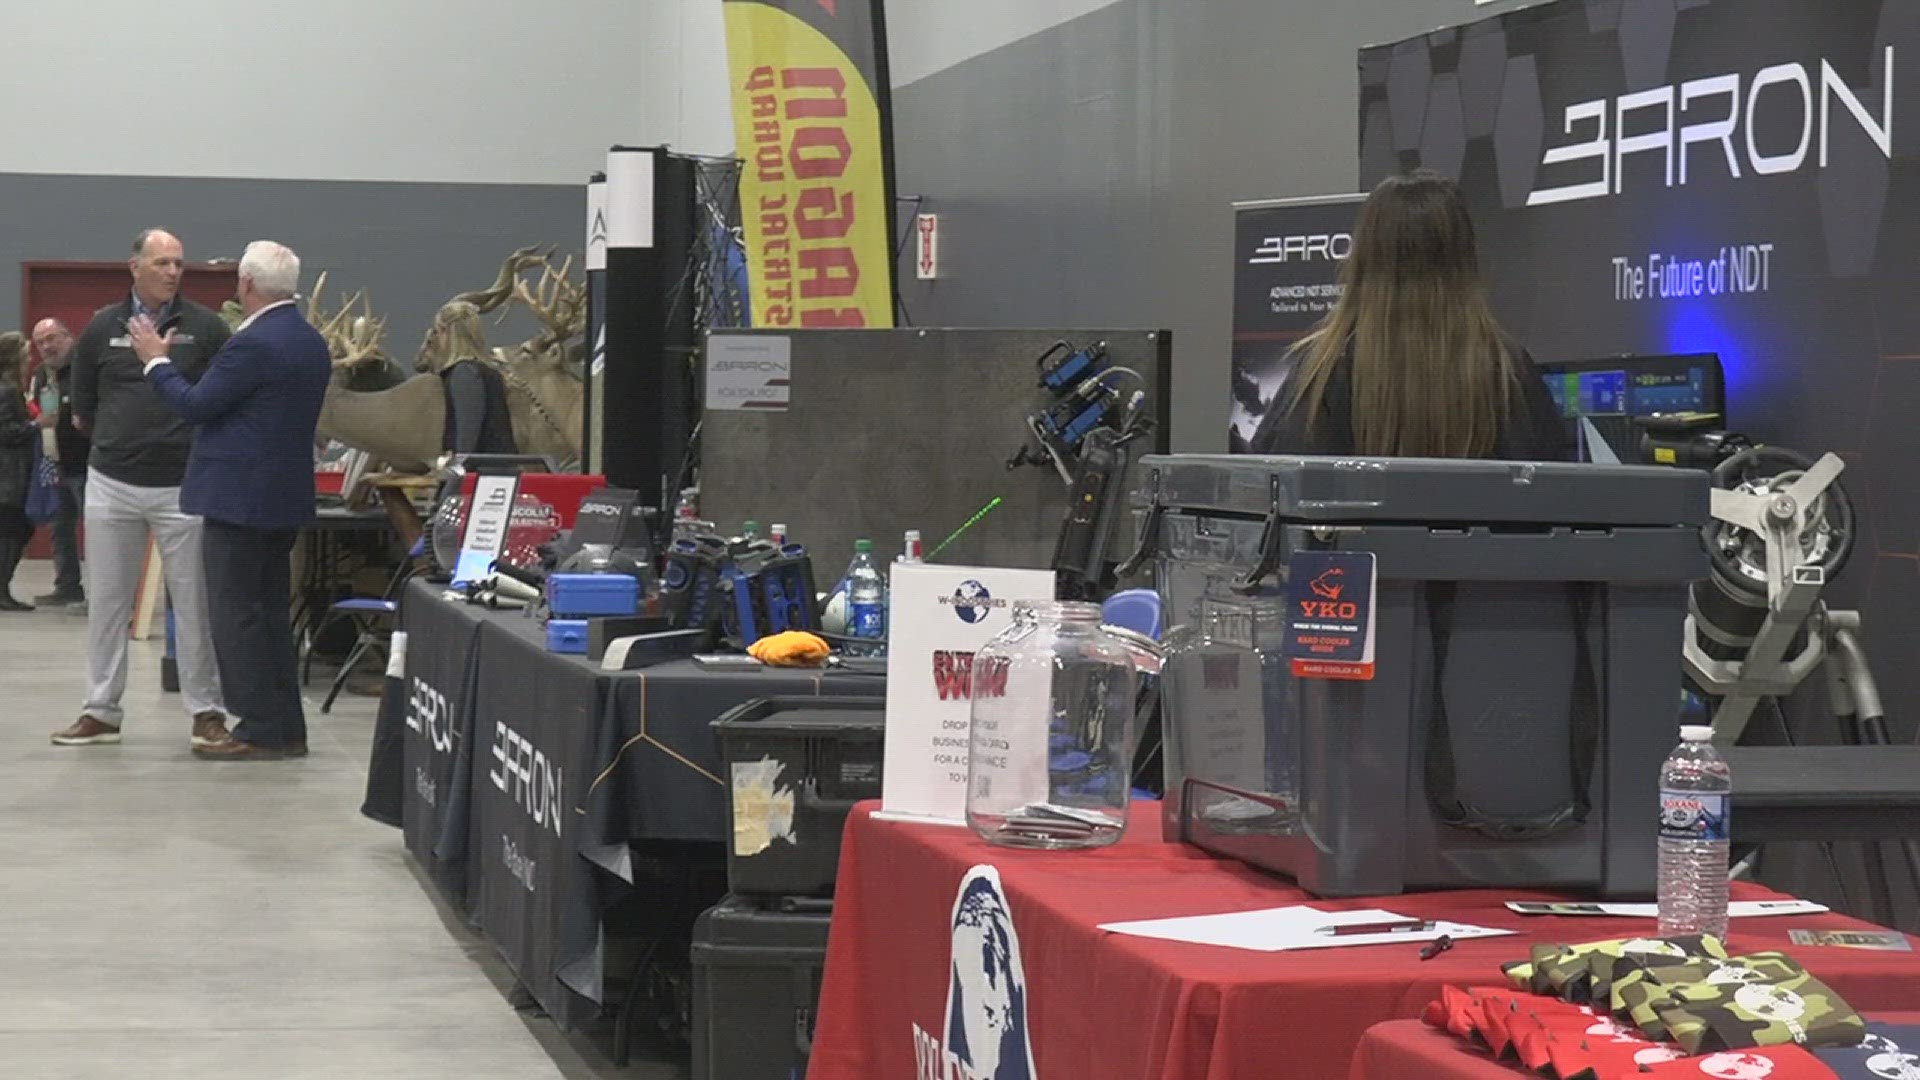 The expo gave people a chance to connect and learn about products that can help as Southeast Texas industry continues to expand.